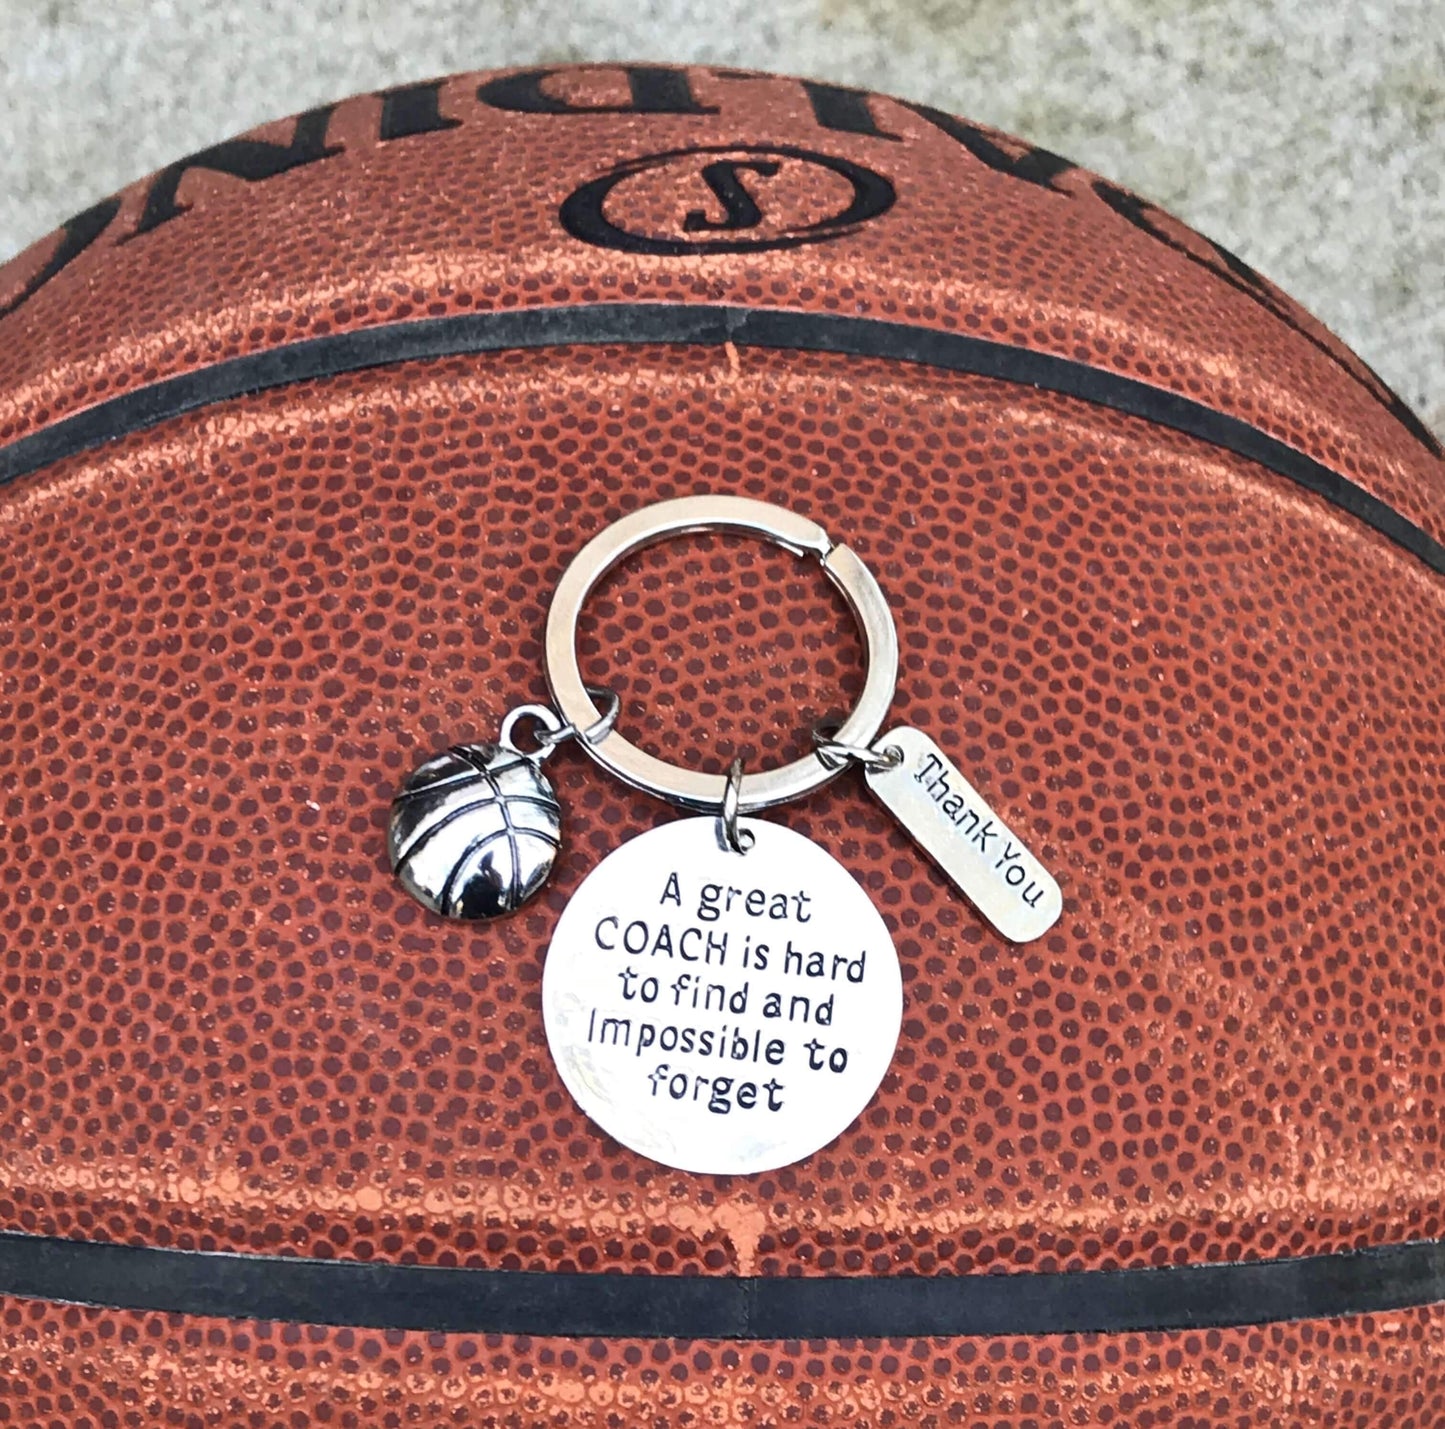 Basketball Coach Keychain with an Inspirational Quote on the Basketball Ball